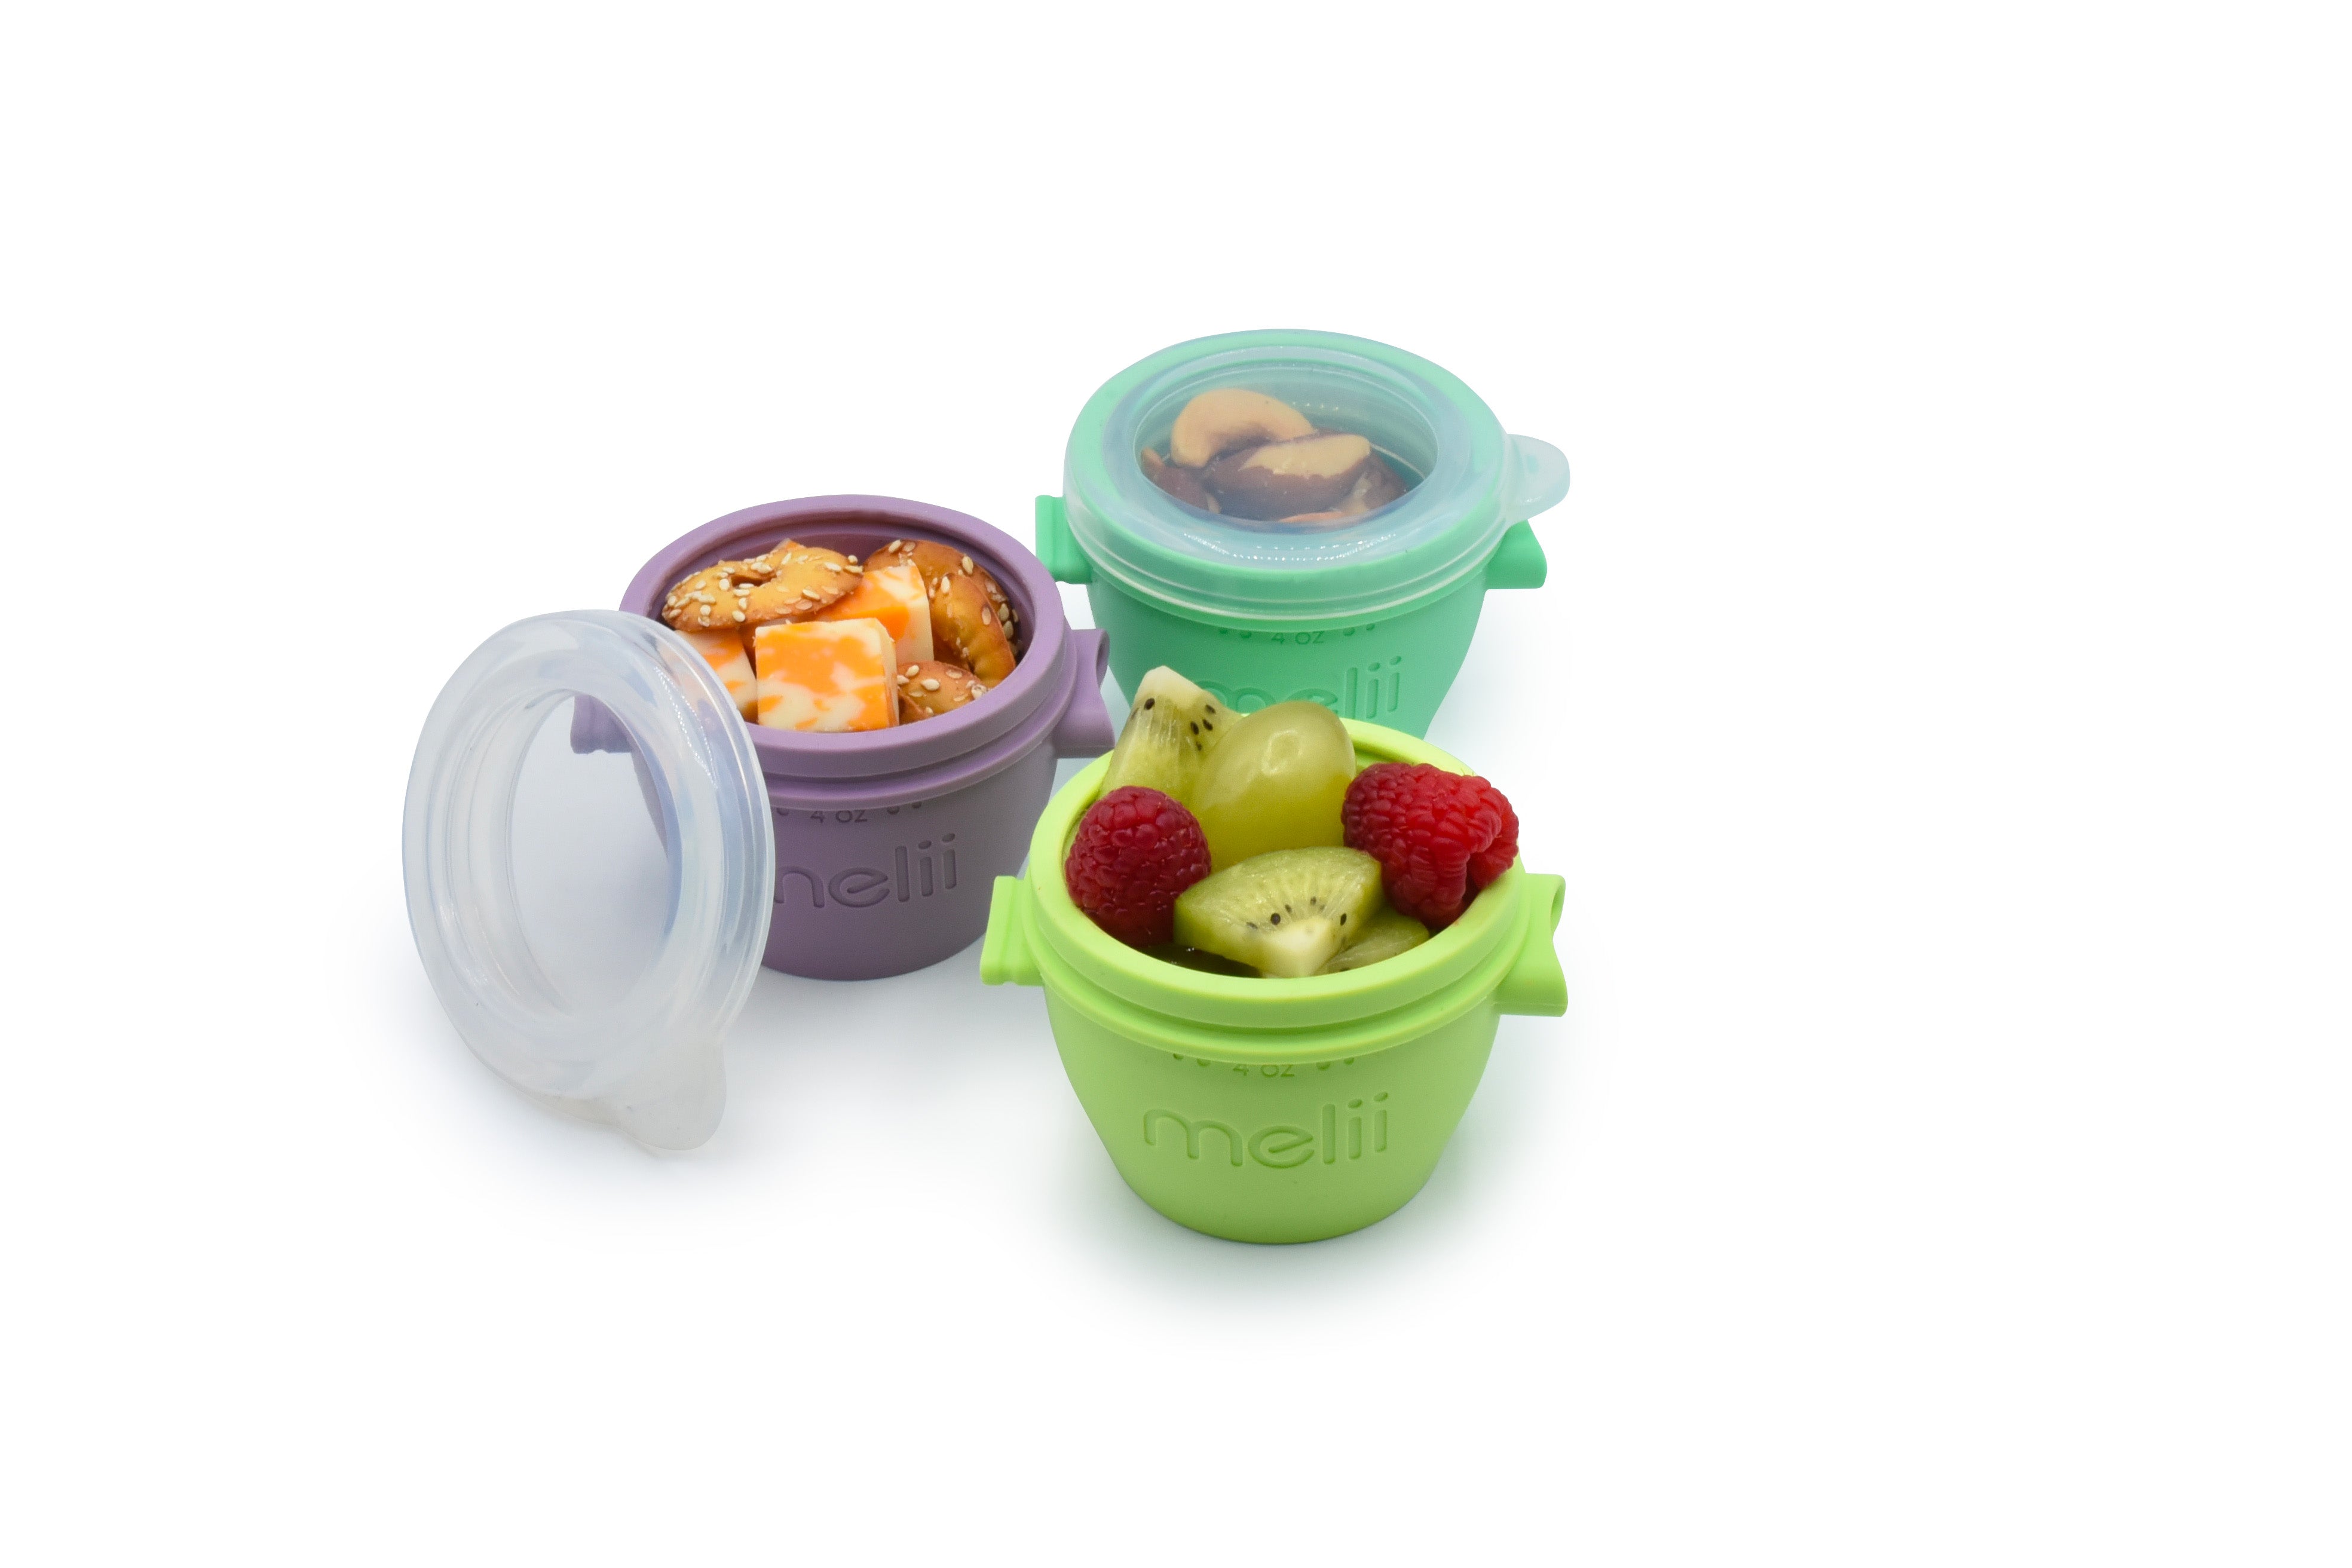 melii Animal Snack Containers with lids - Food Storage for